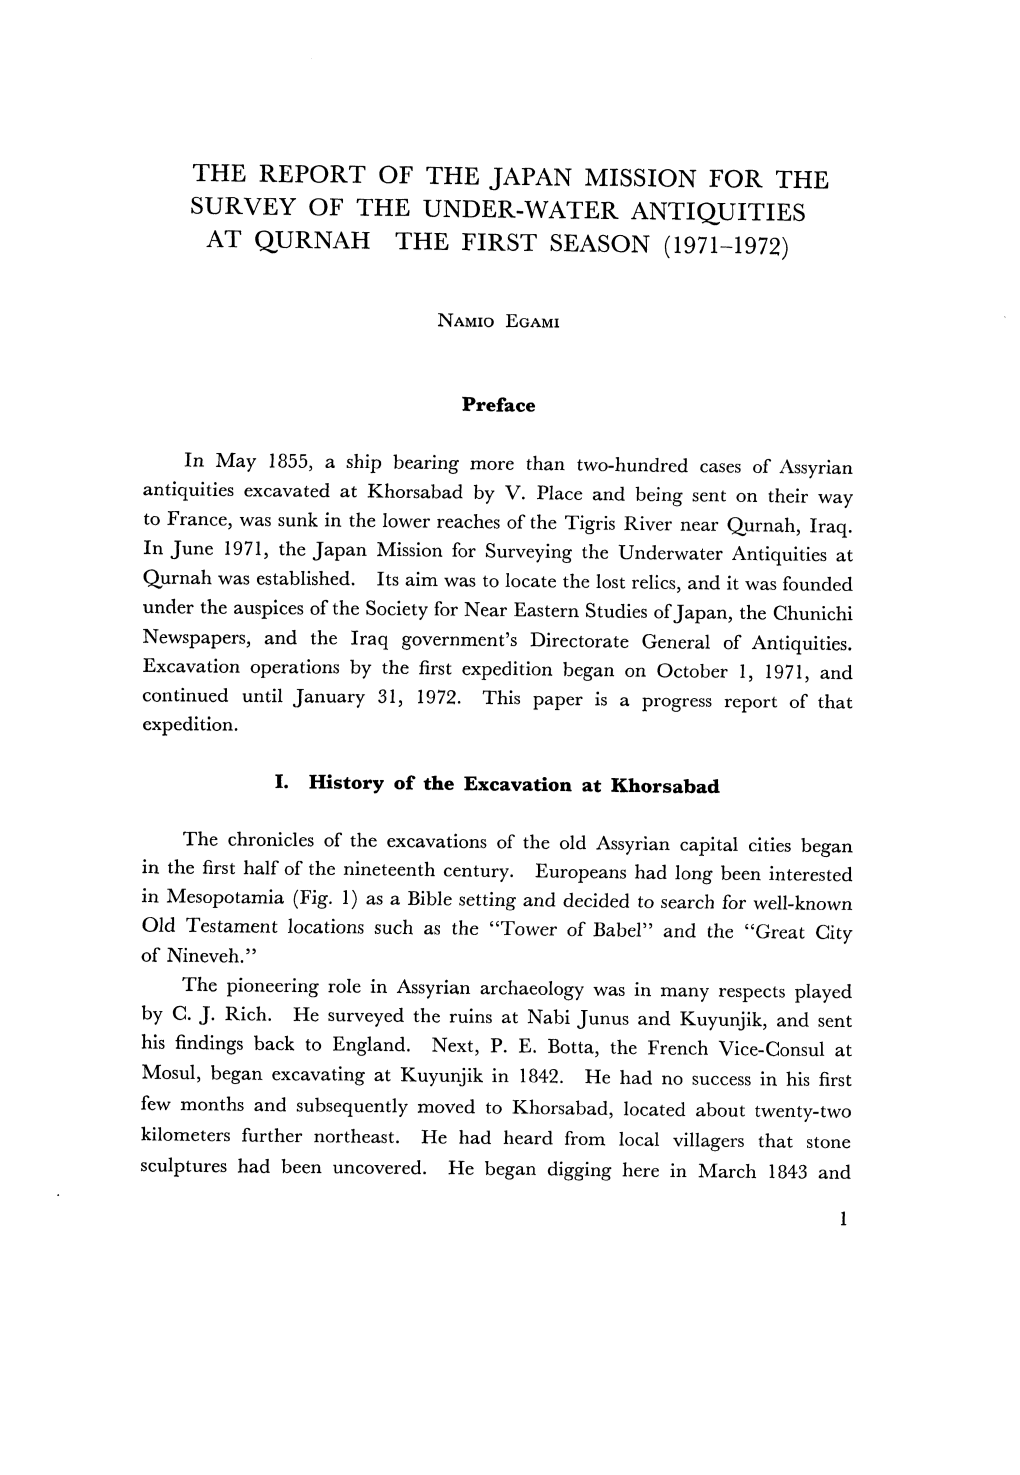 The Report of the Japan Mission for the Survey of the Under-Water Antiquities at Qurnah the First Season (1971-1972)